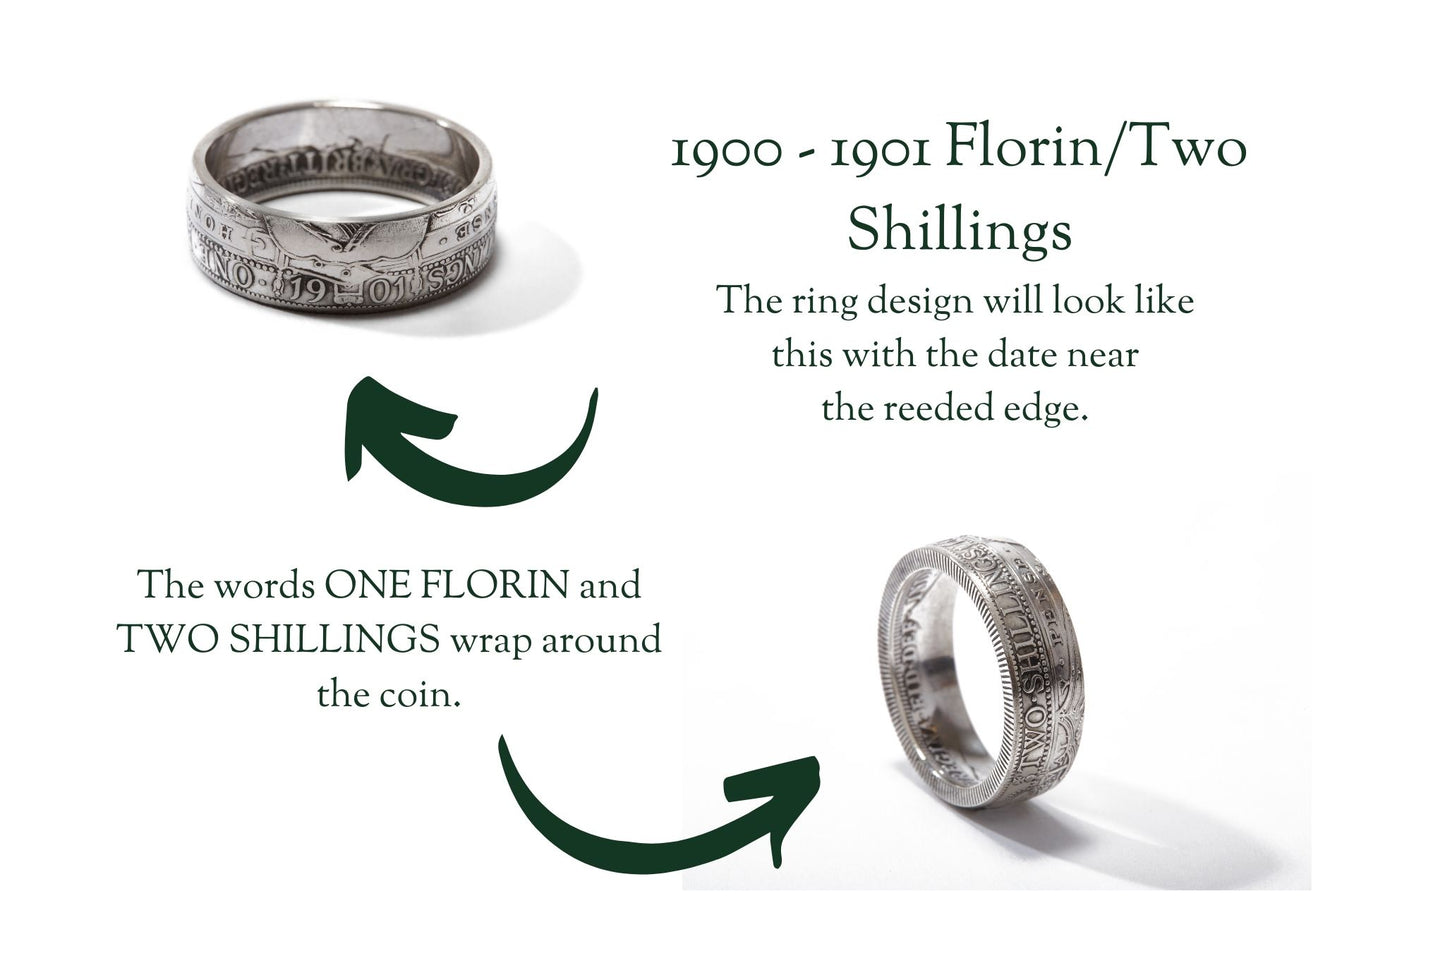 1900-1901 florin coin ring infographic 